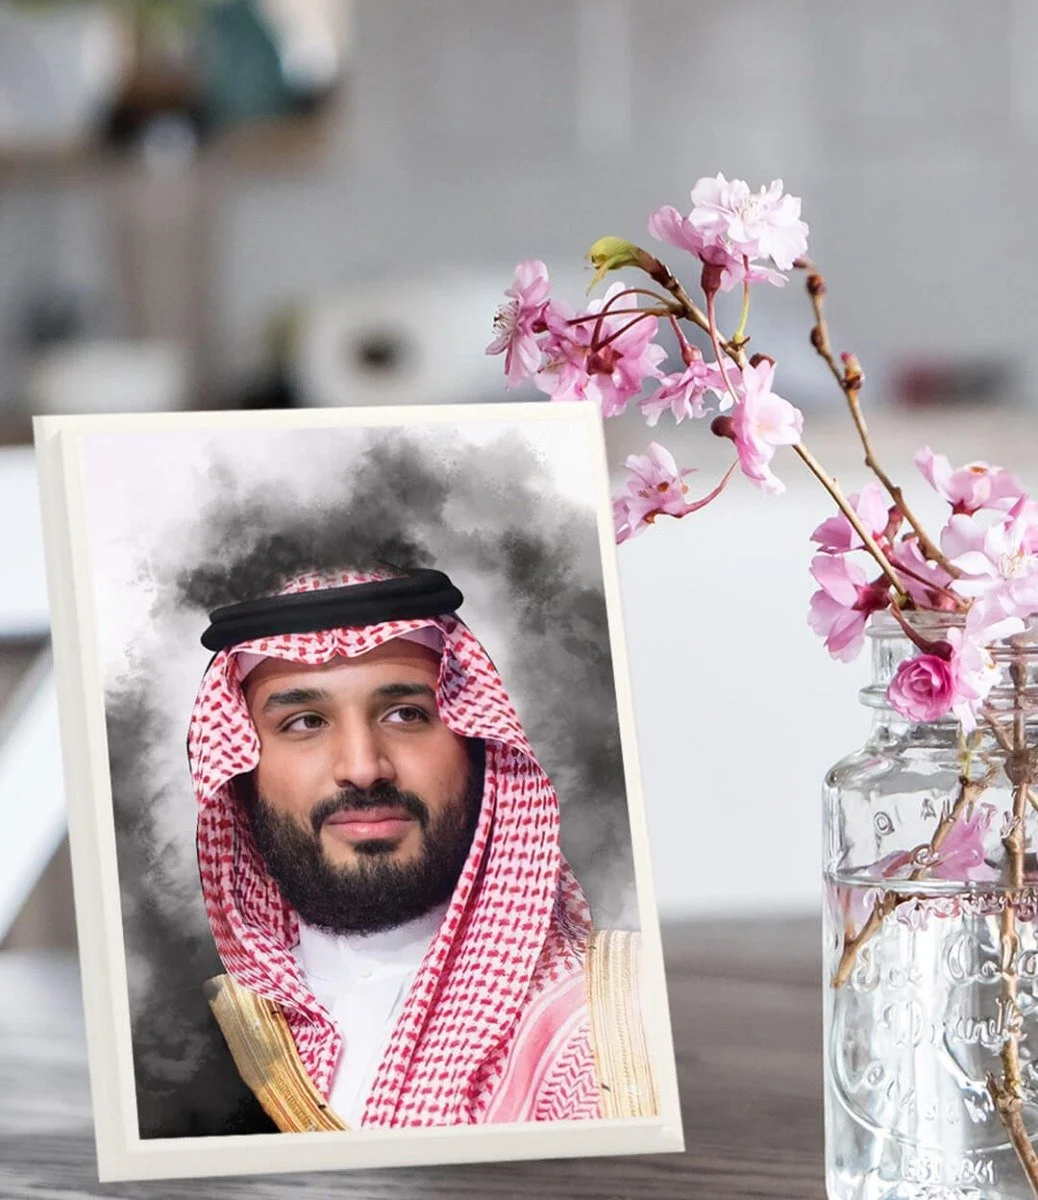 Wooden Plaque With the Portrait of Prince Mohammed Bin Salman